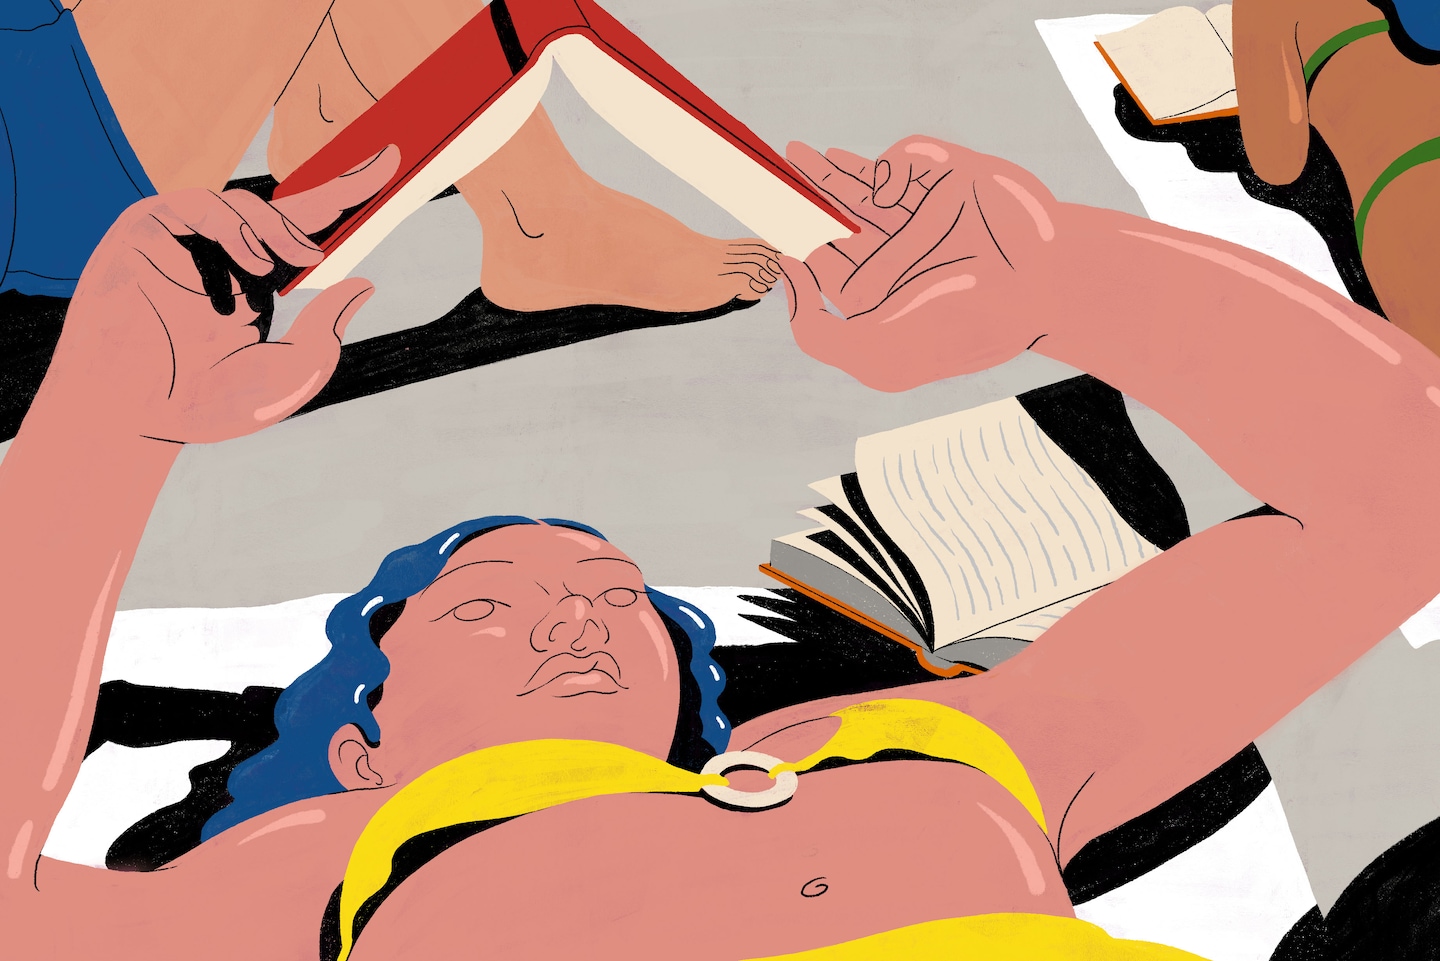 Overview Of The Big Books Of The Summer